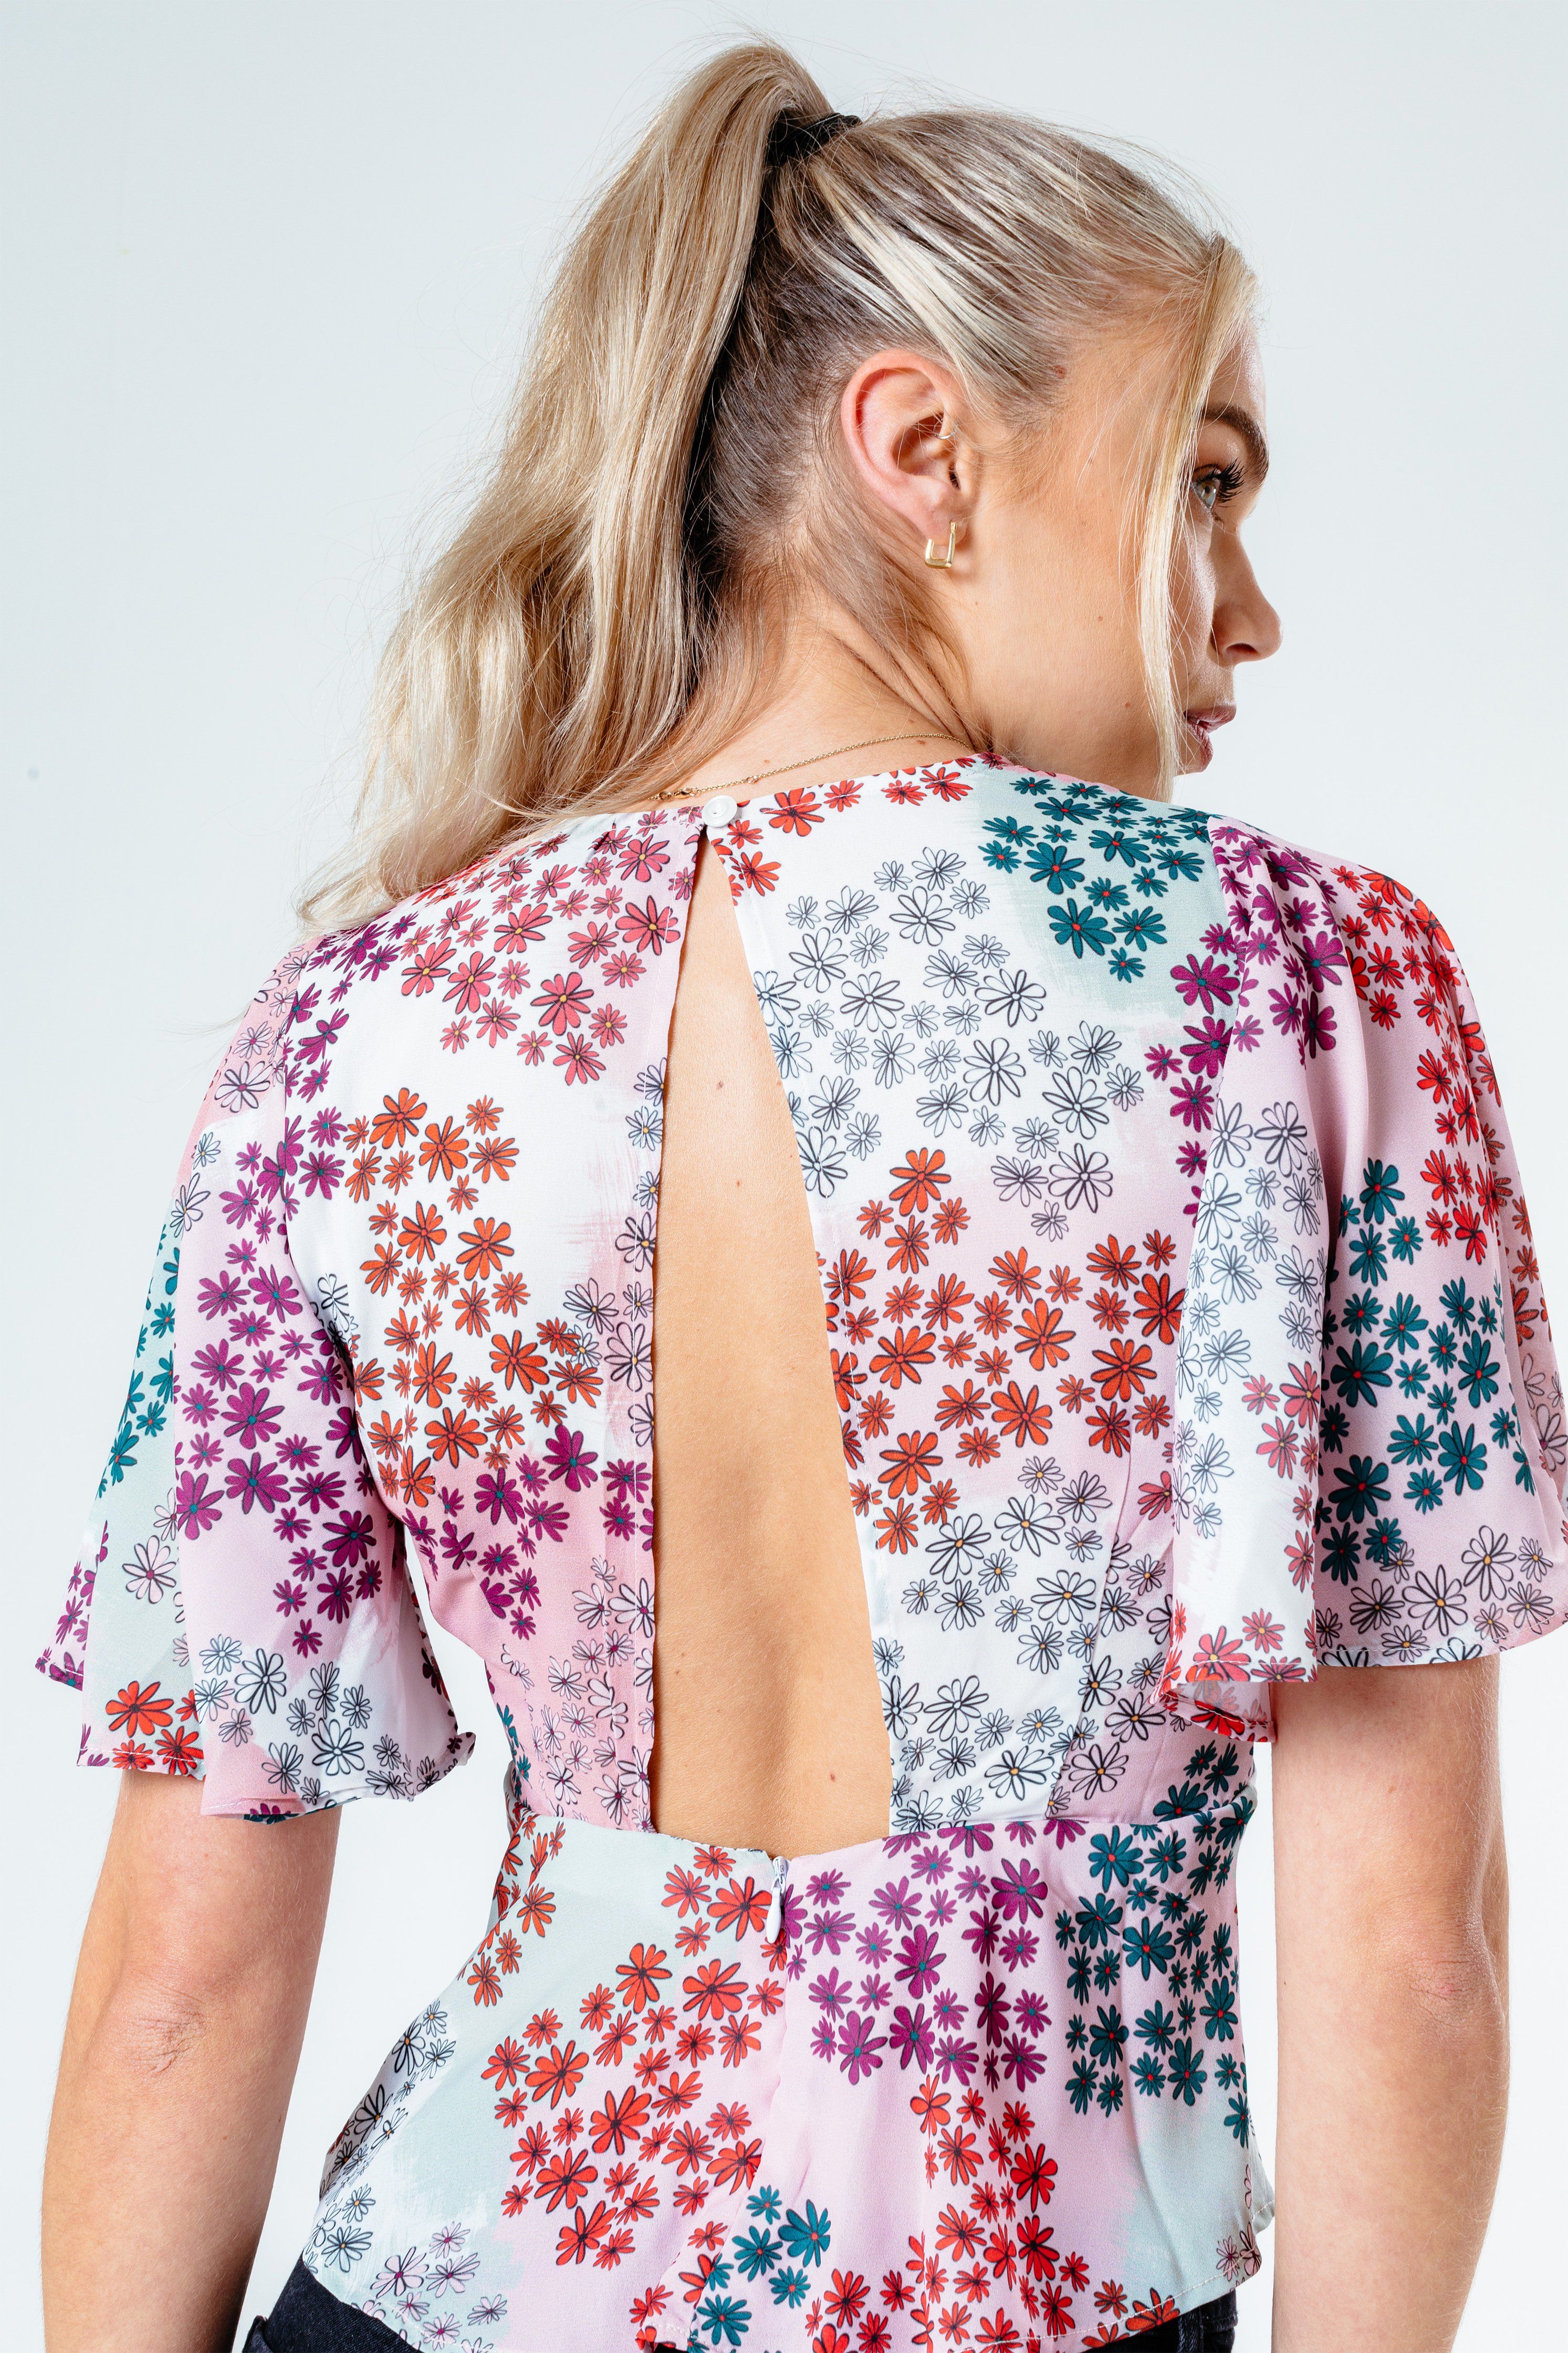 The HYPE. women's paint daisy blouse features a dusty pink, mint, purple and red colour palette. Designed in an all over floral inspired design in a poly fabric base for comfort and breathable space. In our standard women's eve blouse t-shirt shape and  short sleeves. Wear with high-waisted denim jeans for an everyday essential look. Machine washable.